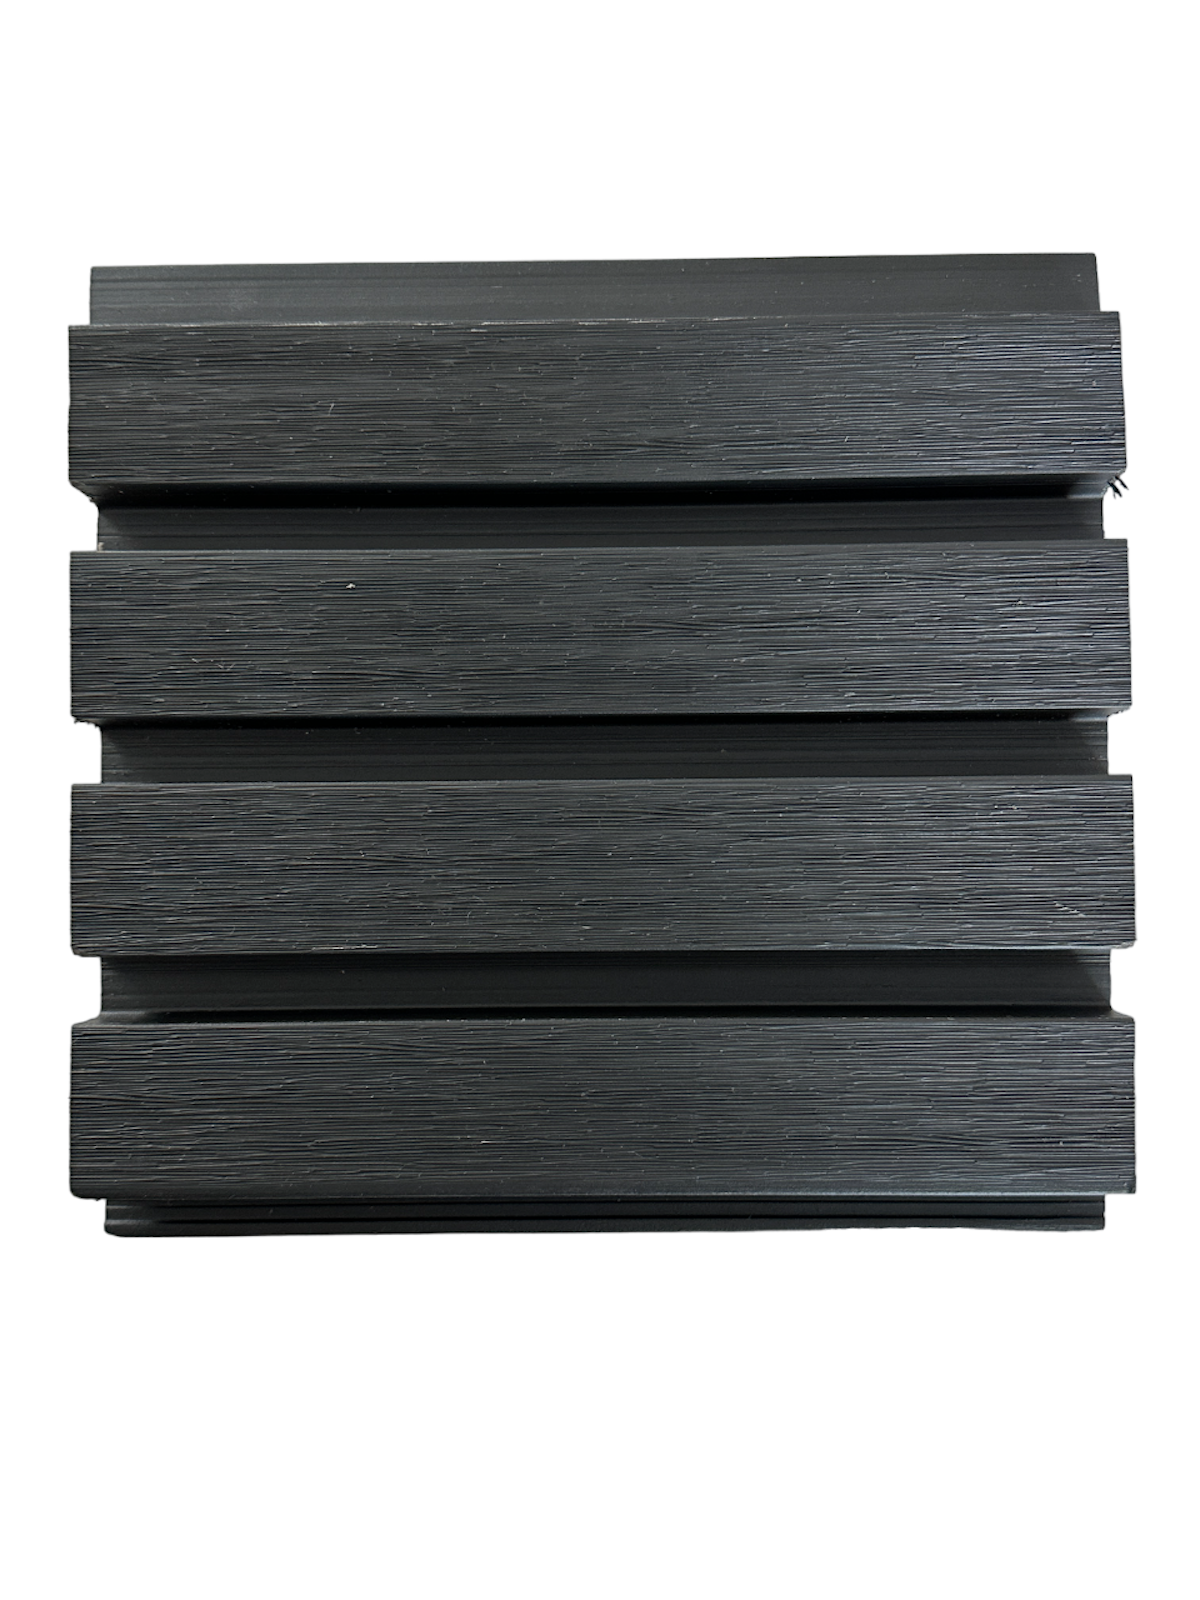 Black Exterior Siding Panels Accent Wall Decor European Modern Wood Grain 8.5 in by 114 in